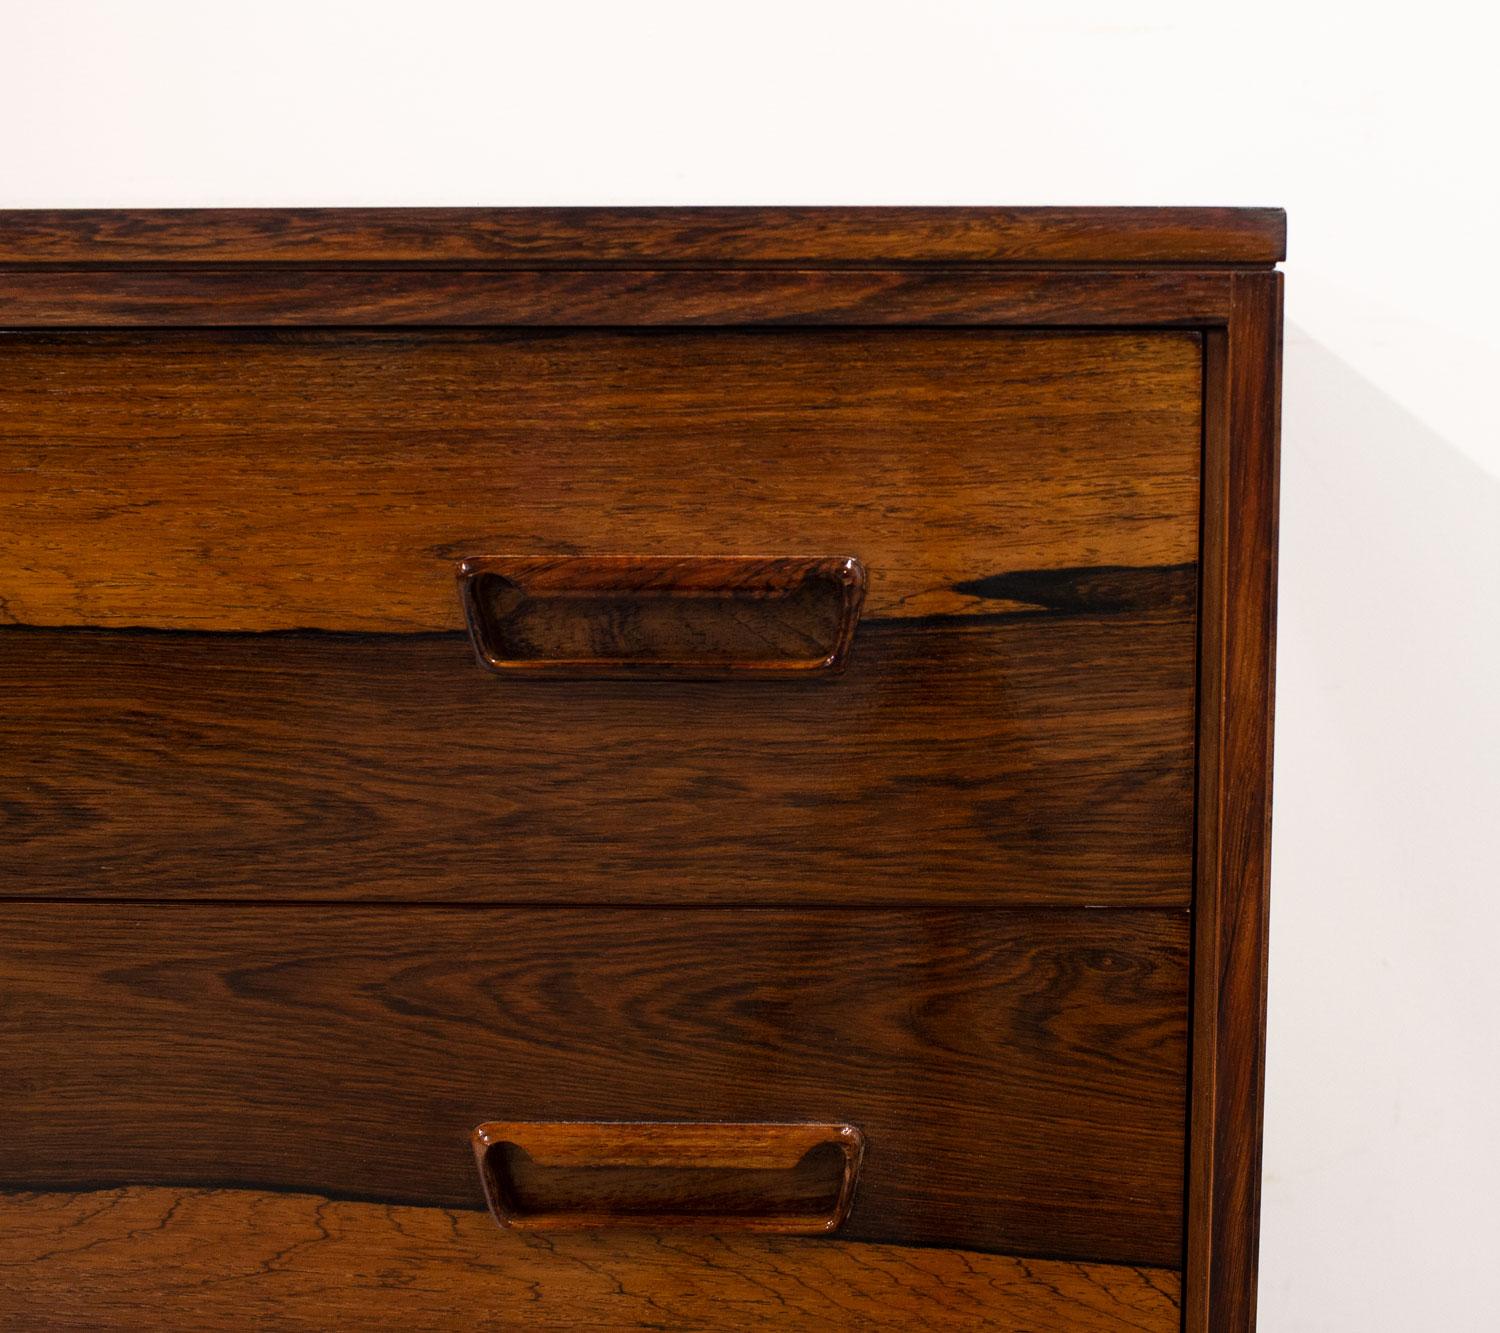 20th Century Danish Rosewood Chest of Drawers in the manner of Arne Wahl Iversen, 1960s For Sale